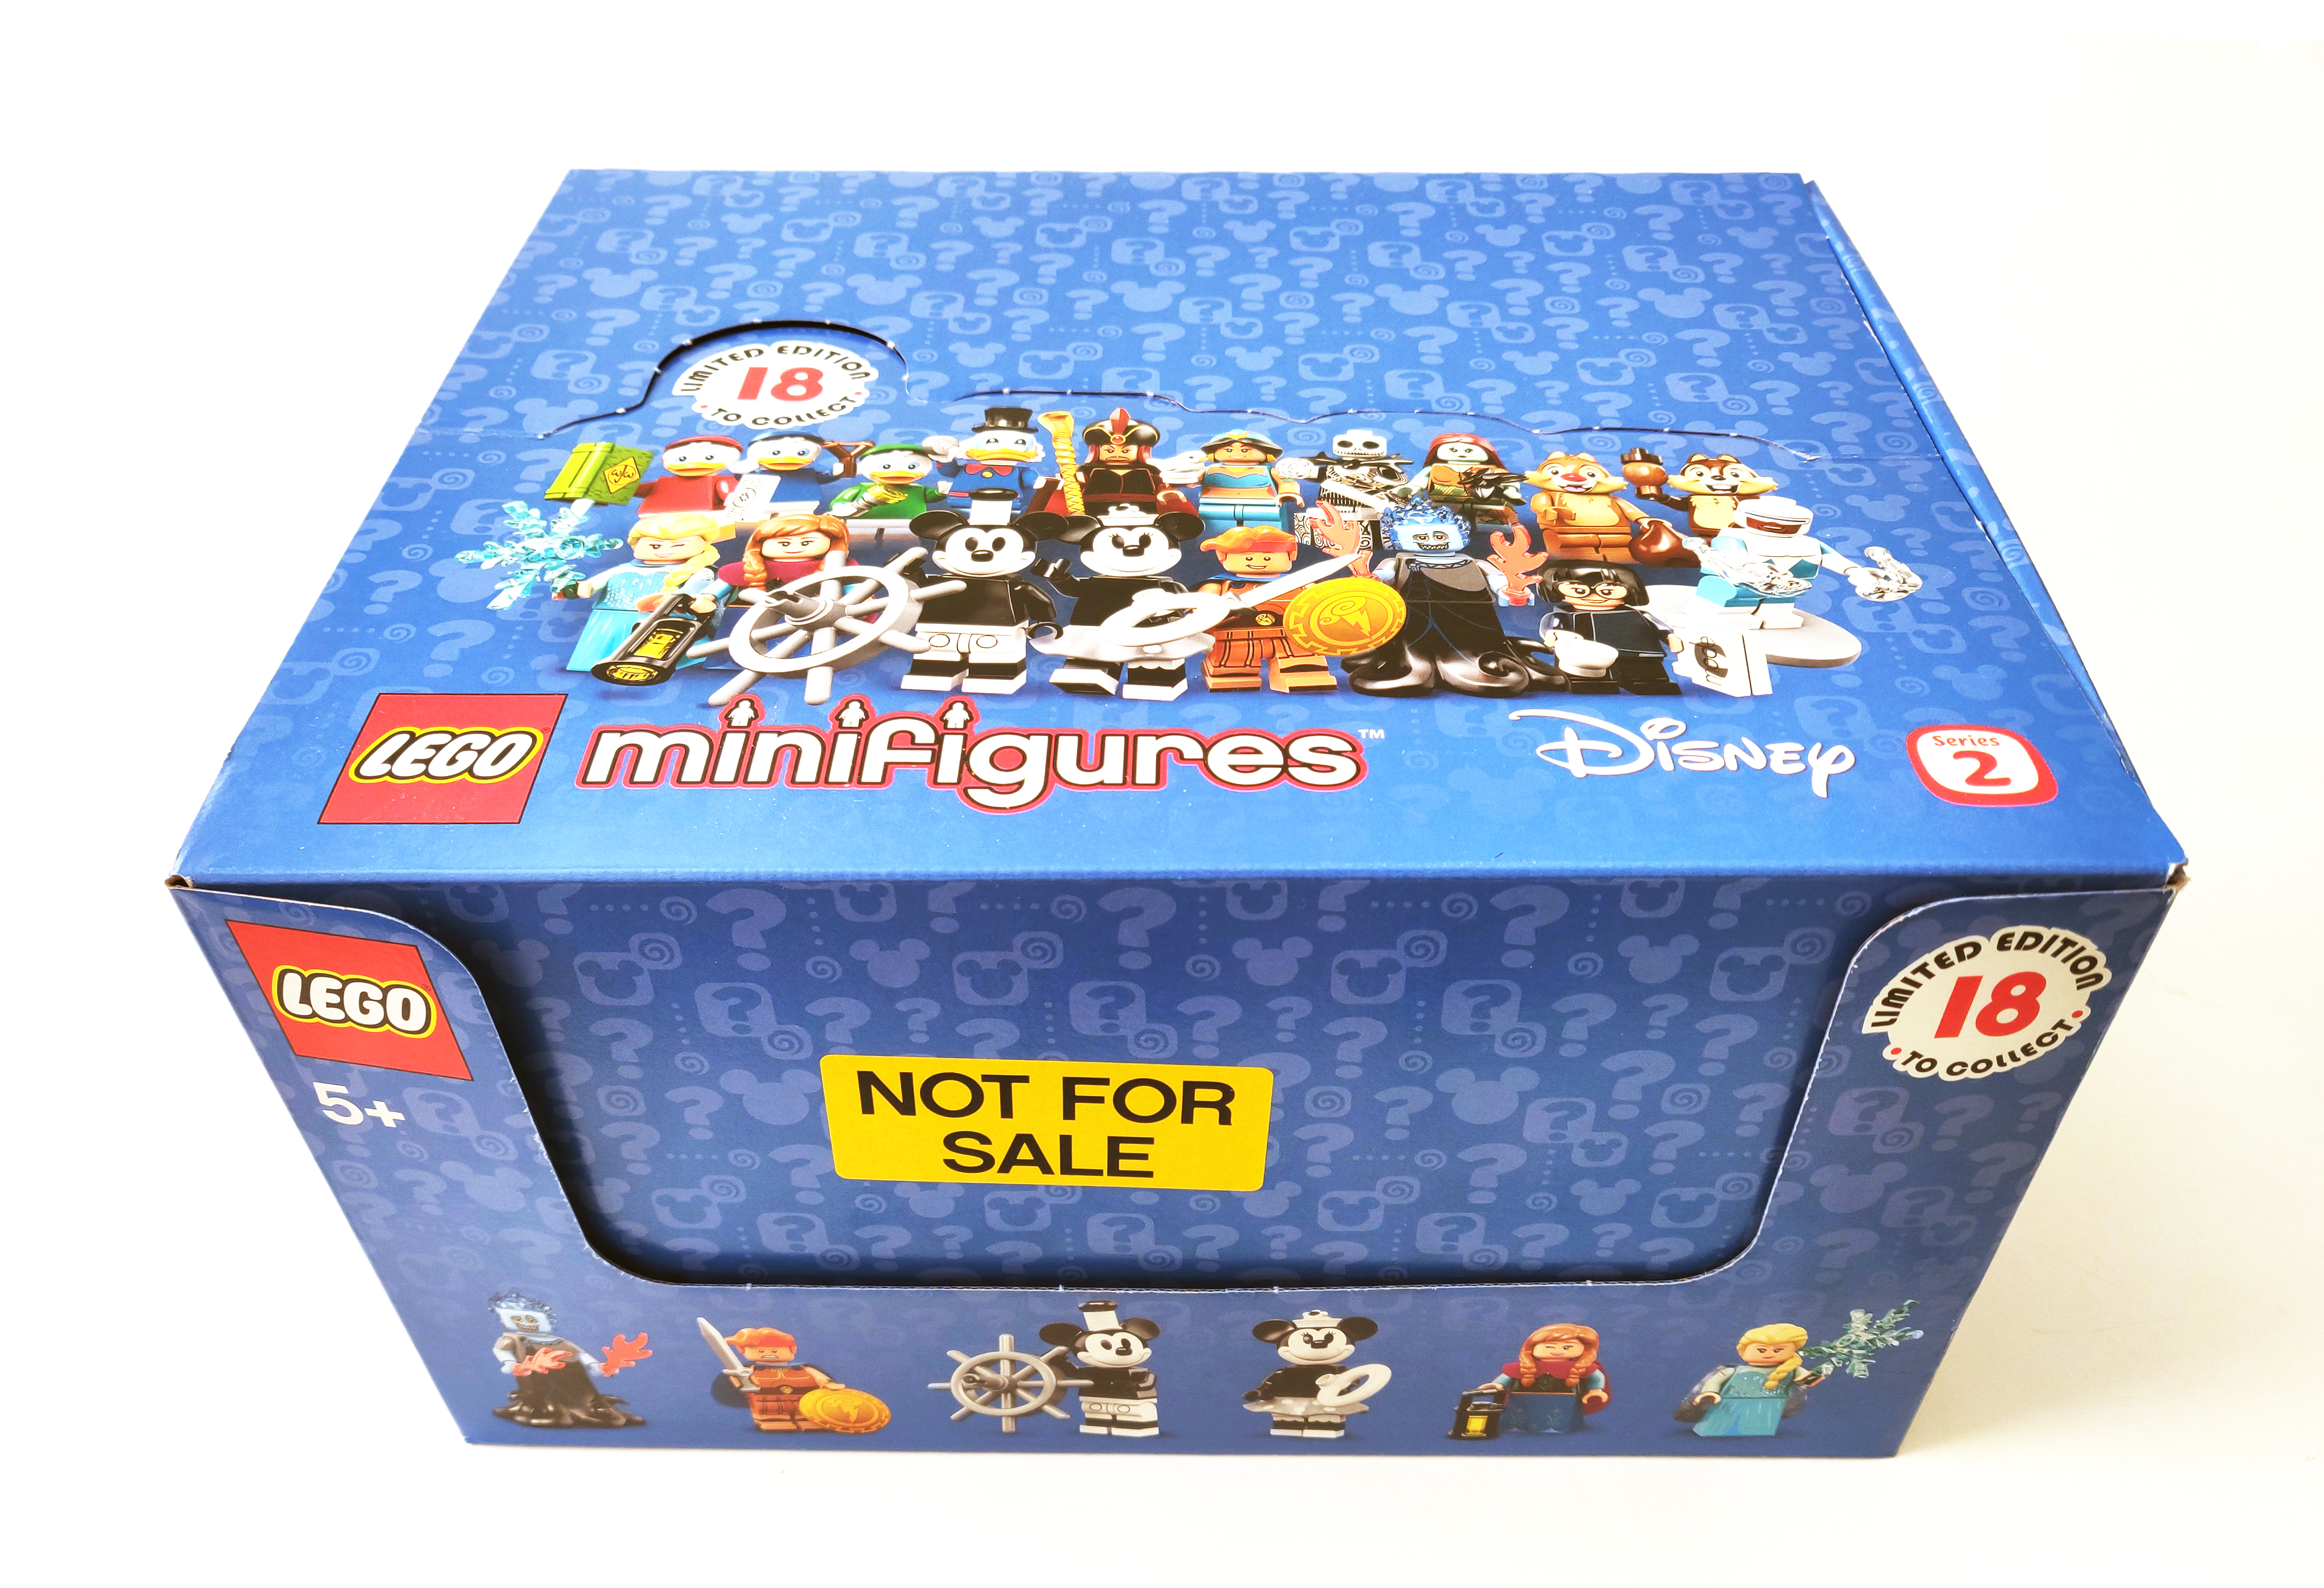 LEGO Disney Series 2 Collectible Minifigures (71024) Review - The